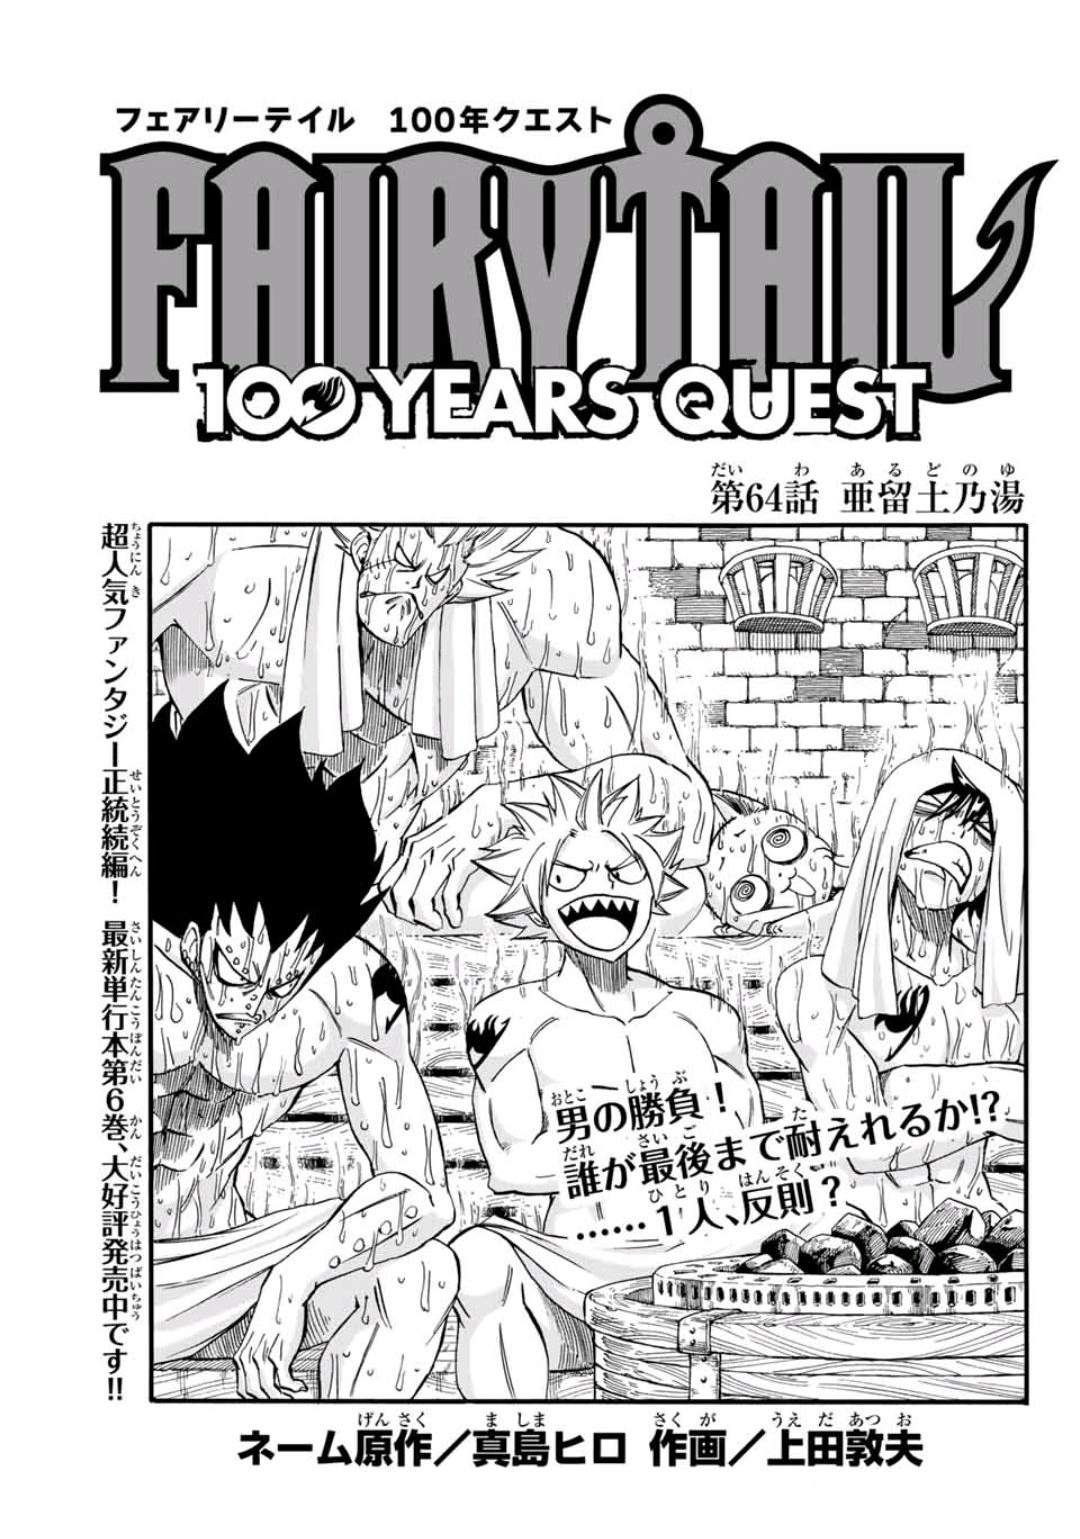 Fairy Tail 100 Years Quest Chapter 64 Fairy Tail Wiki Fandom